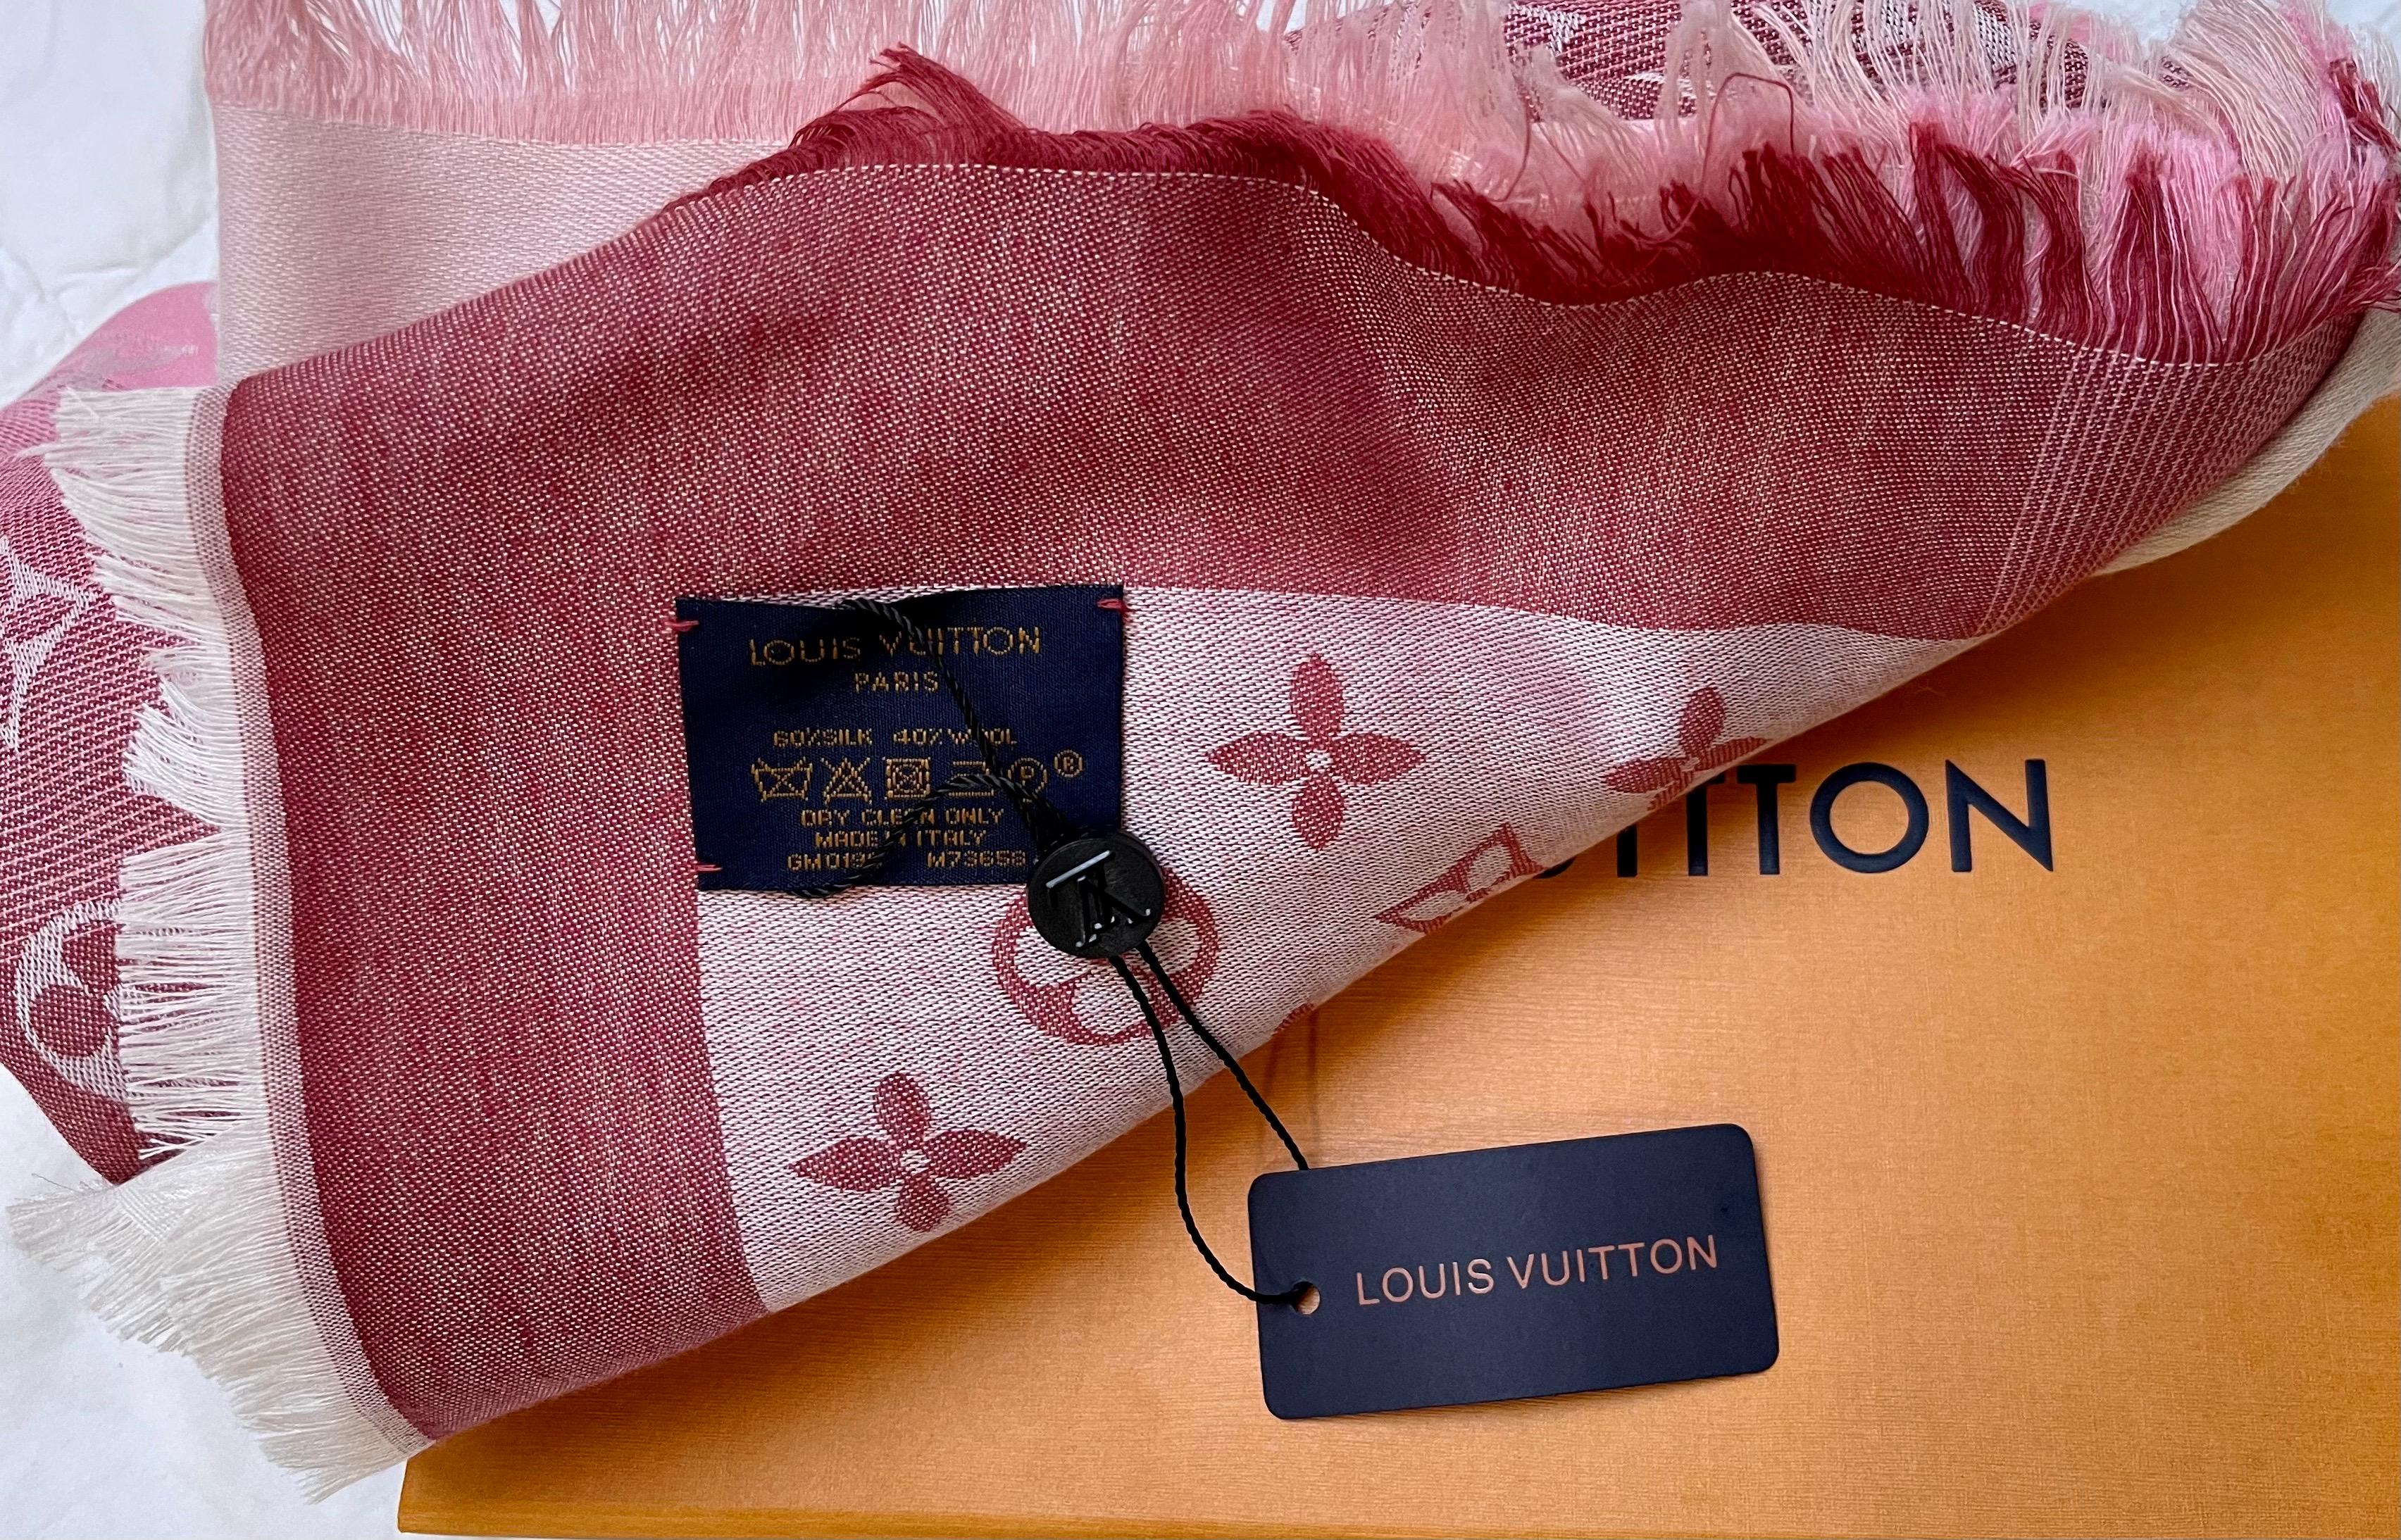 Louis Vuitton Beige/Pink/Rose /Rouge Shaded Monogram Shawl Scarf/Wrap Size 56X56
BRAND NEW, AUTHENTIC, SOLD OUT, HARD TO FIND*
Take home this beautiful  Shaded monogram shawl .Color range from Beige to pink to Rose to Rouge
Made from a bland of 60%